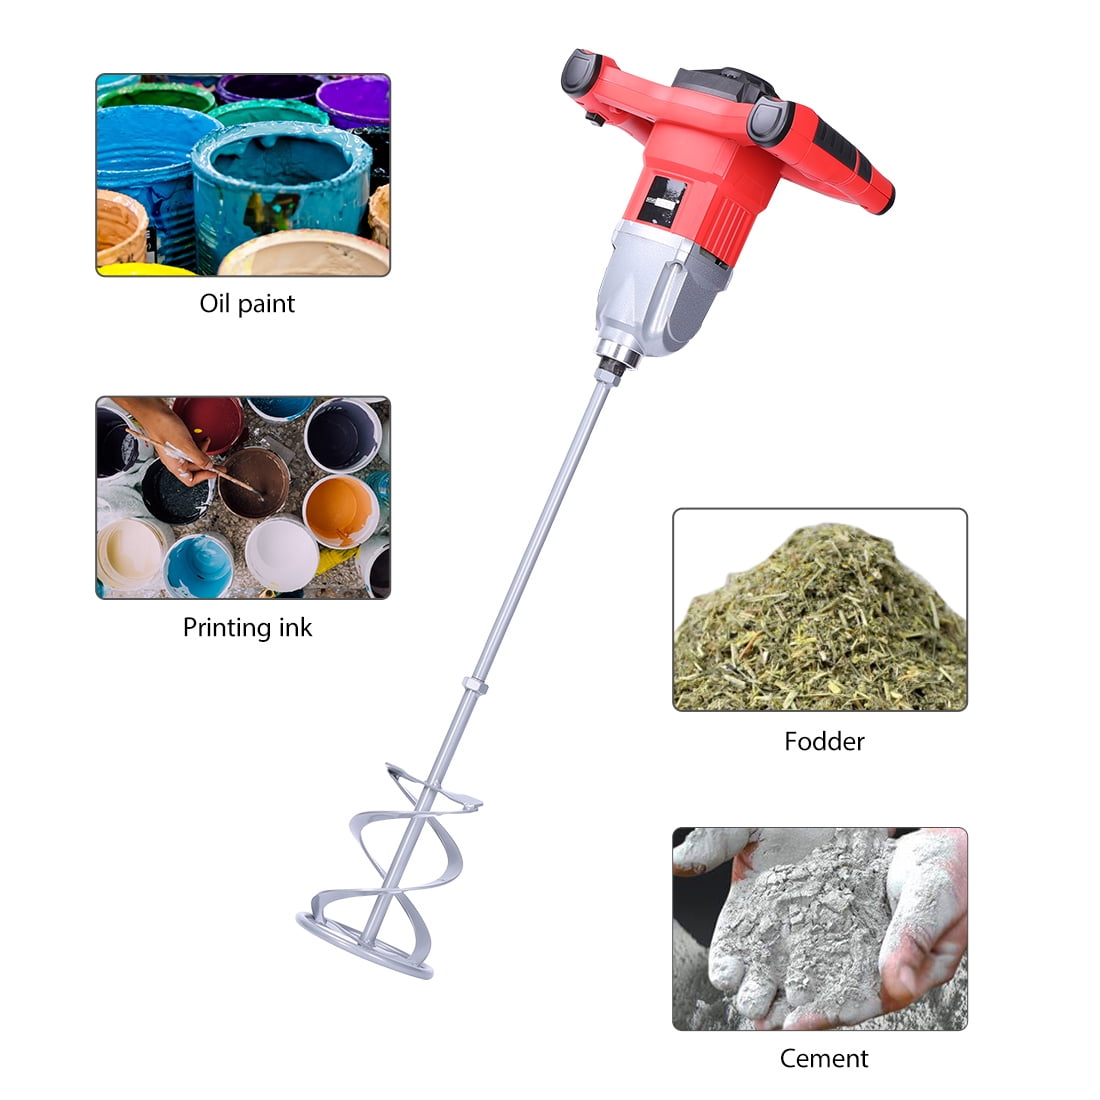 110V Handheld Electric Variable Speed Mixer Concrete Cement Paint Mortars Mixer 